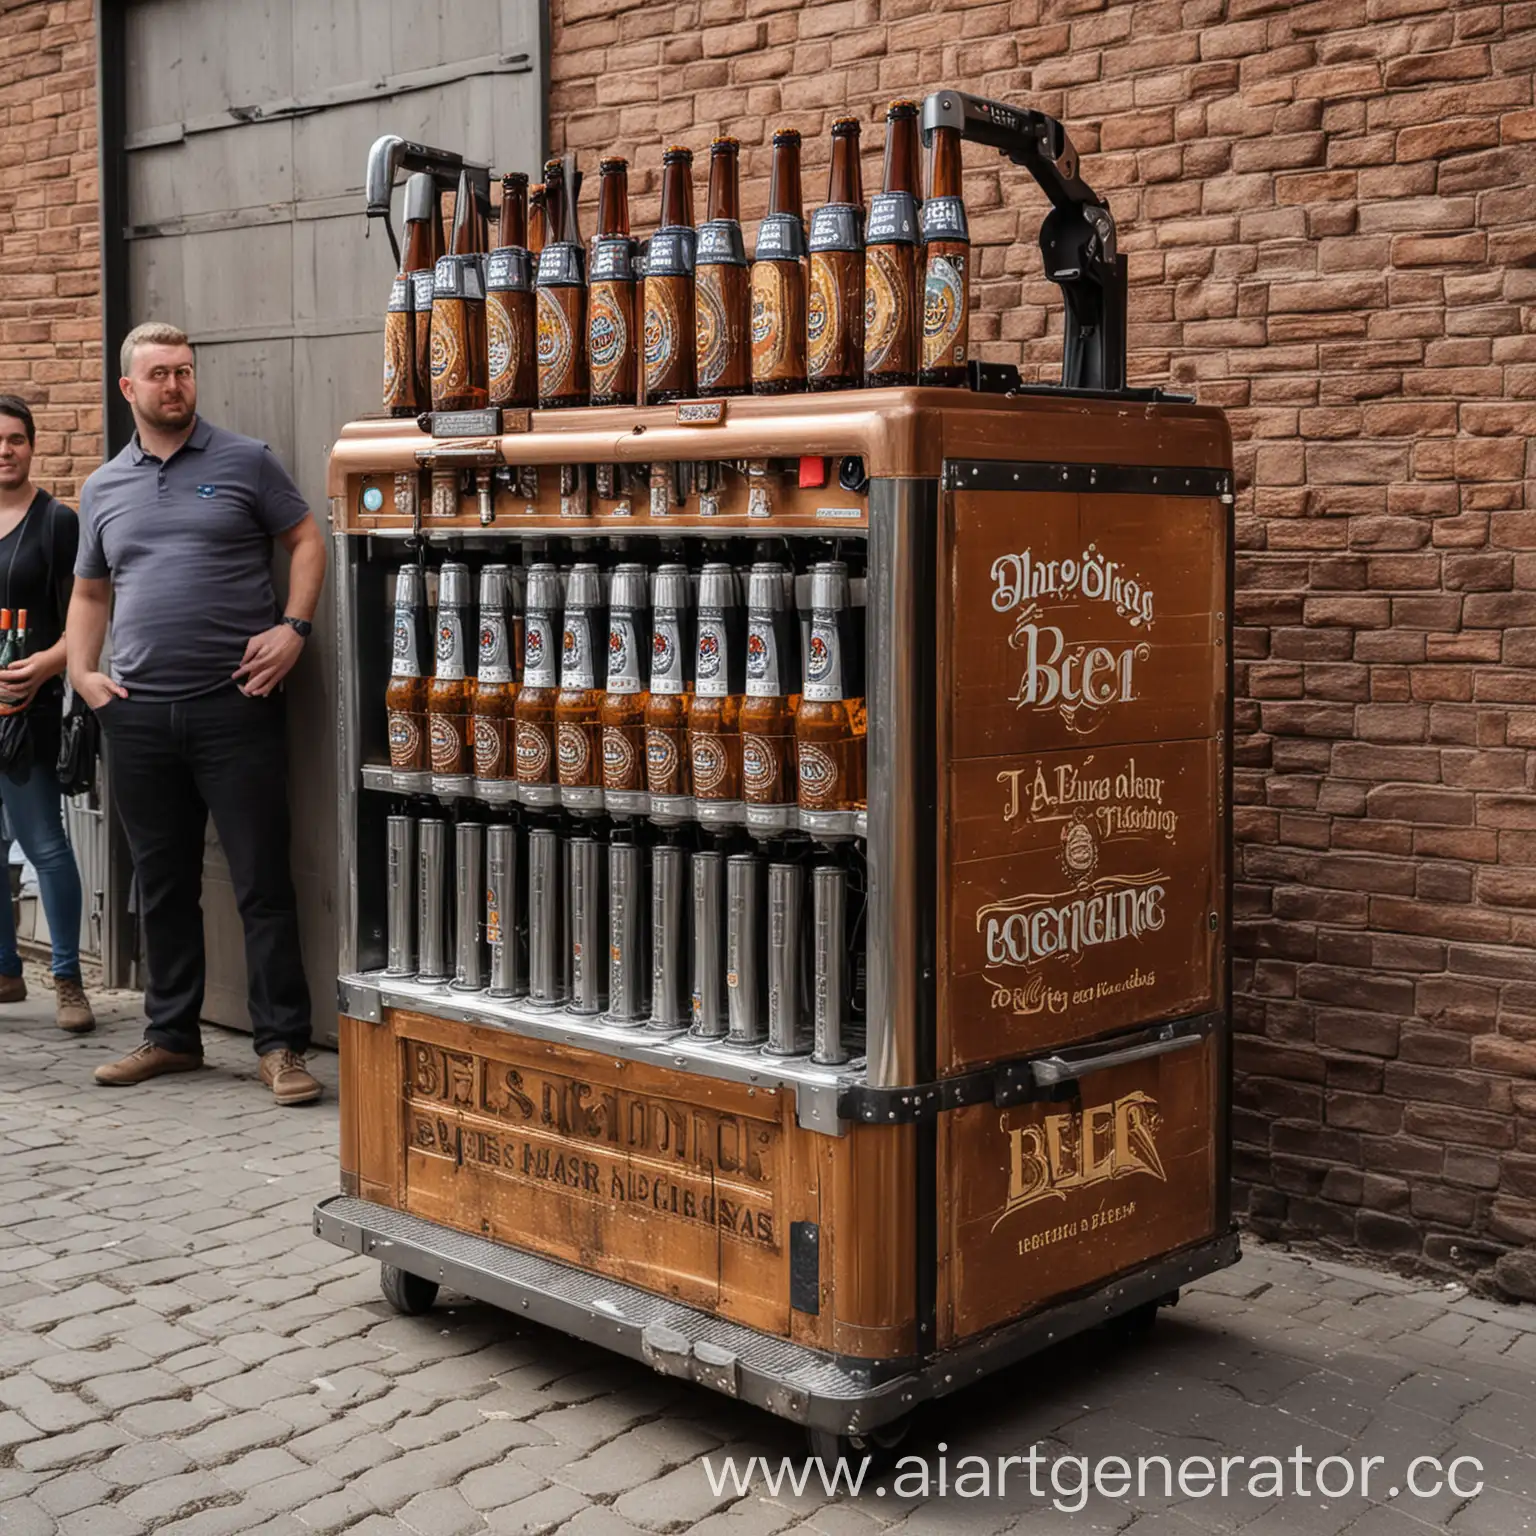 Beer-Machine-A-Novel-Contraption-of-Beer-Where-Beer-Takes-a-Joyful-Ride